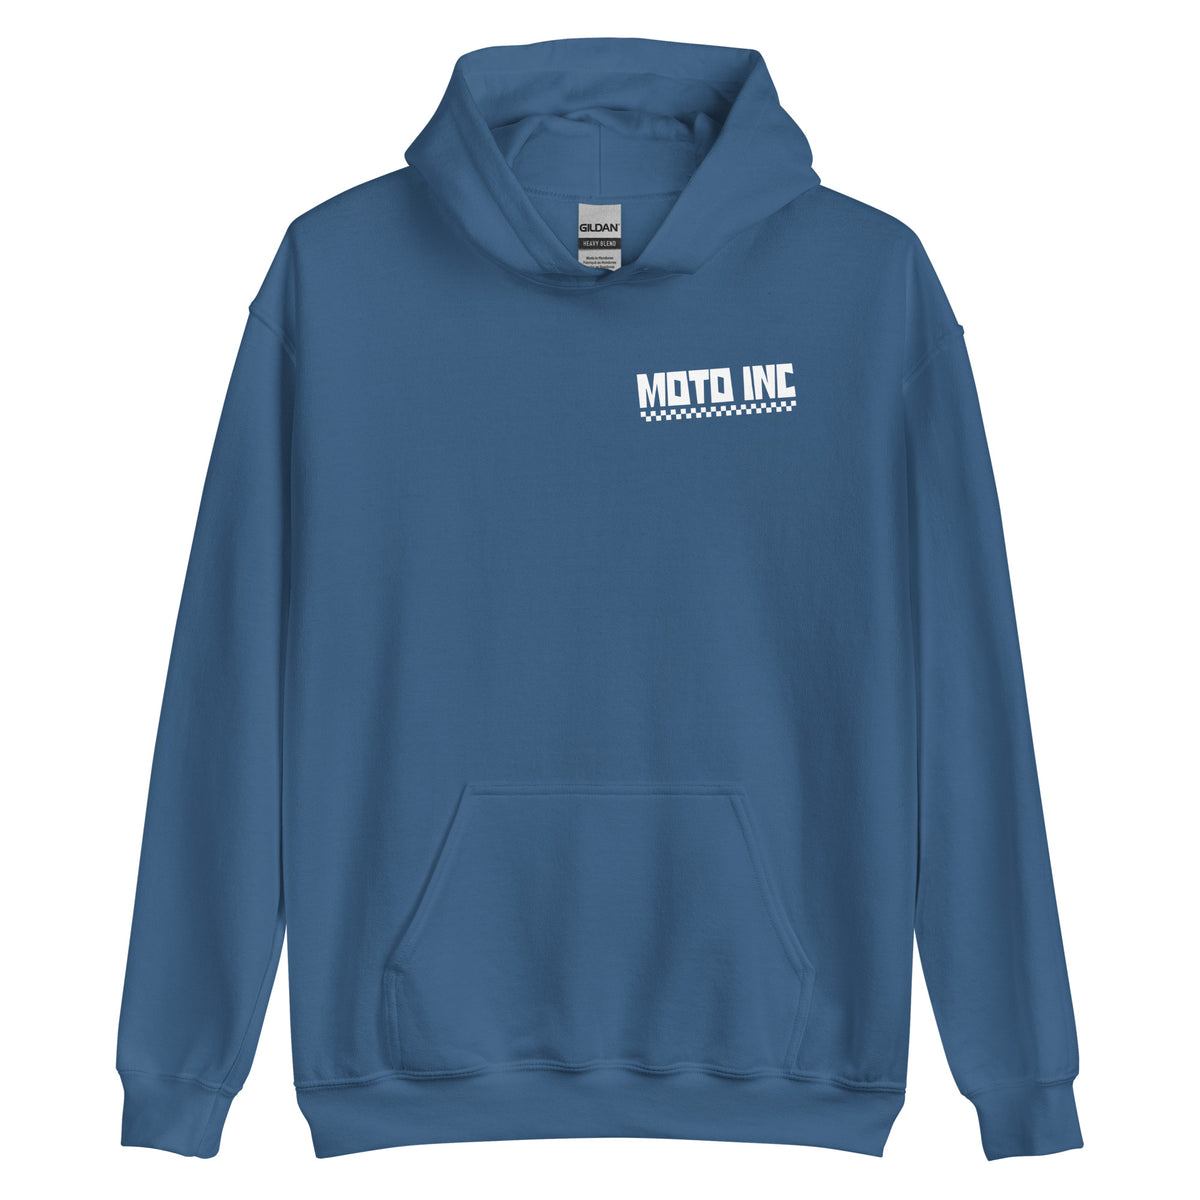 Bubba 971 - The Wall - Hoodie